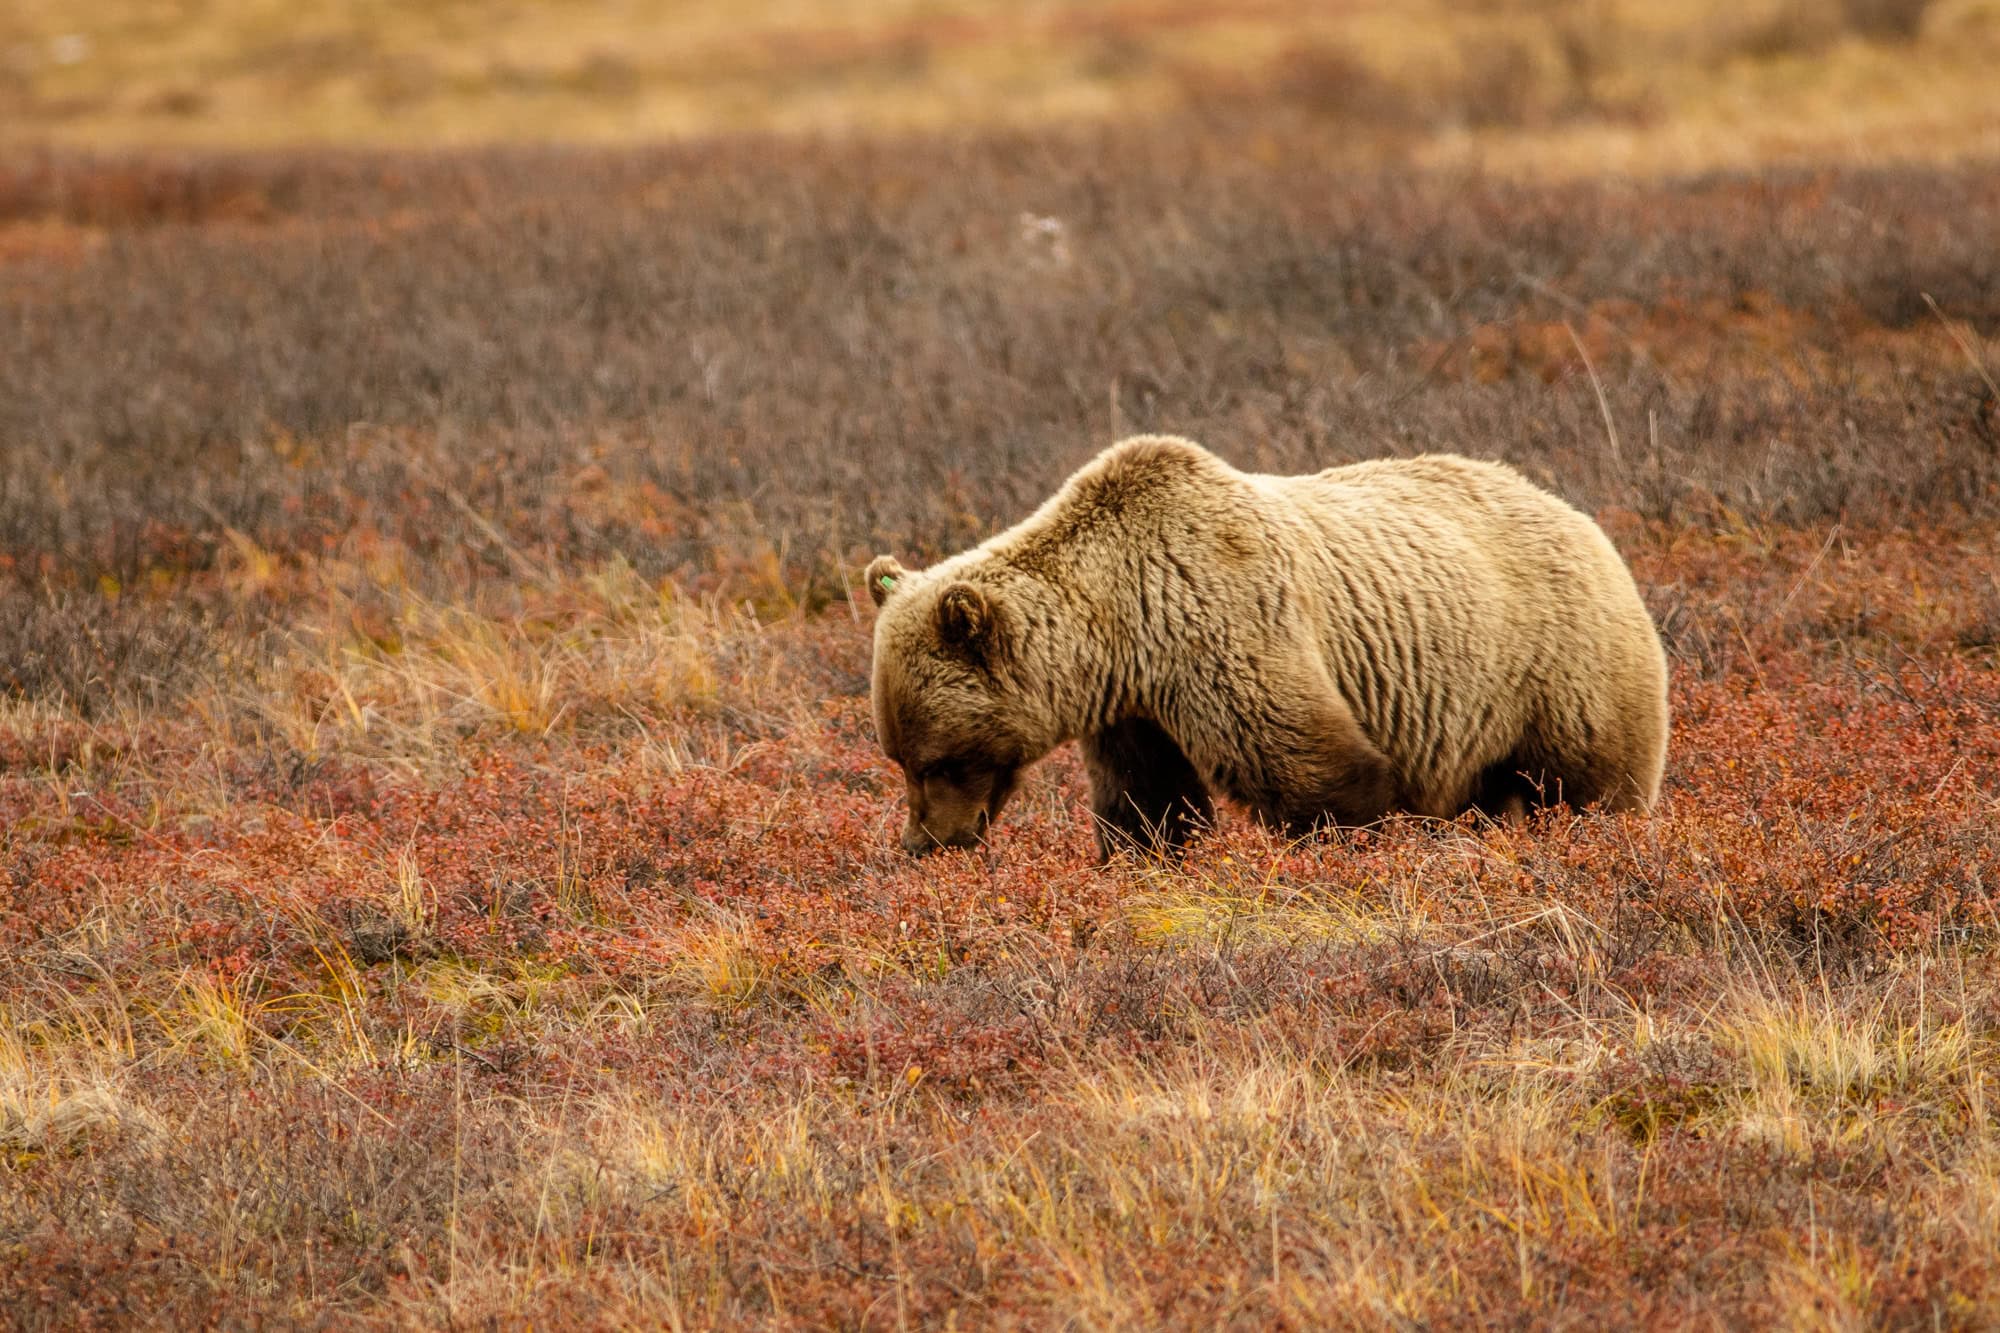 <p>If you’re like us, spending time watching wildlife isn’t just a hobby; it’s a passion. And <strong>where better to indulge this passion than in Alaska, a place so rich in animals it’s like stepping into a live documentary</strong>, minus the voiceover.</p> <p>And yes, Alaska has been on our must-visit list longer than we’d like to admit. We’re aiming for the summer of 2025, and trust us, we’ve been doing our homework to make every second count. </p> <p>So, for travelers wading through the sea of possibilities when it comes to seeing wildlife, unsure where to cast your anchor during a visit, we’re here to guide you. Having sifted through endless options, <strong>we’re bringing you a list of wildlife experiences in Alaska that promise to be nothing short of epic</strong> (and are certainly on our bucket list for next year).</p>